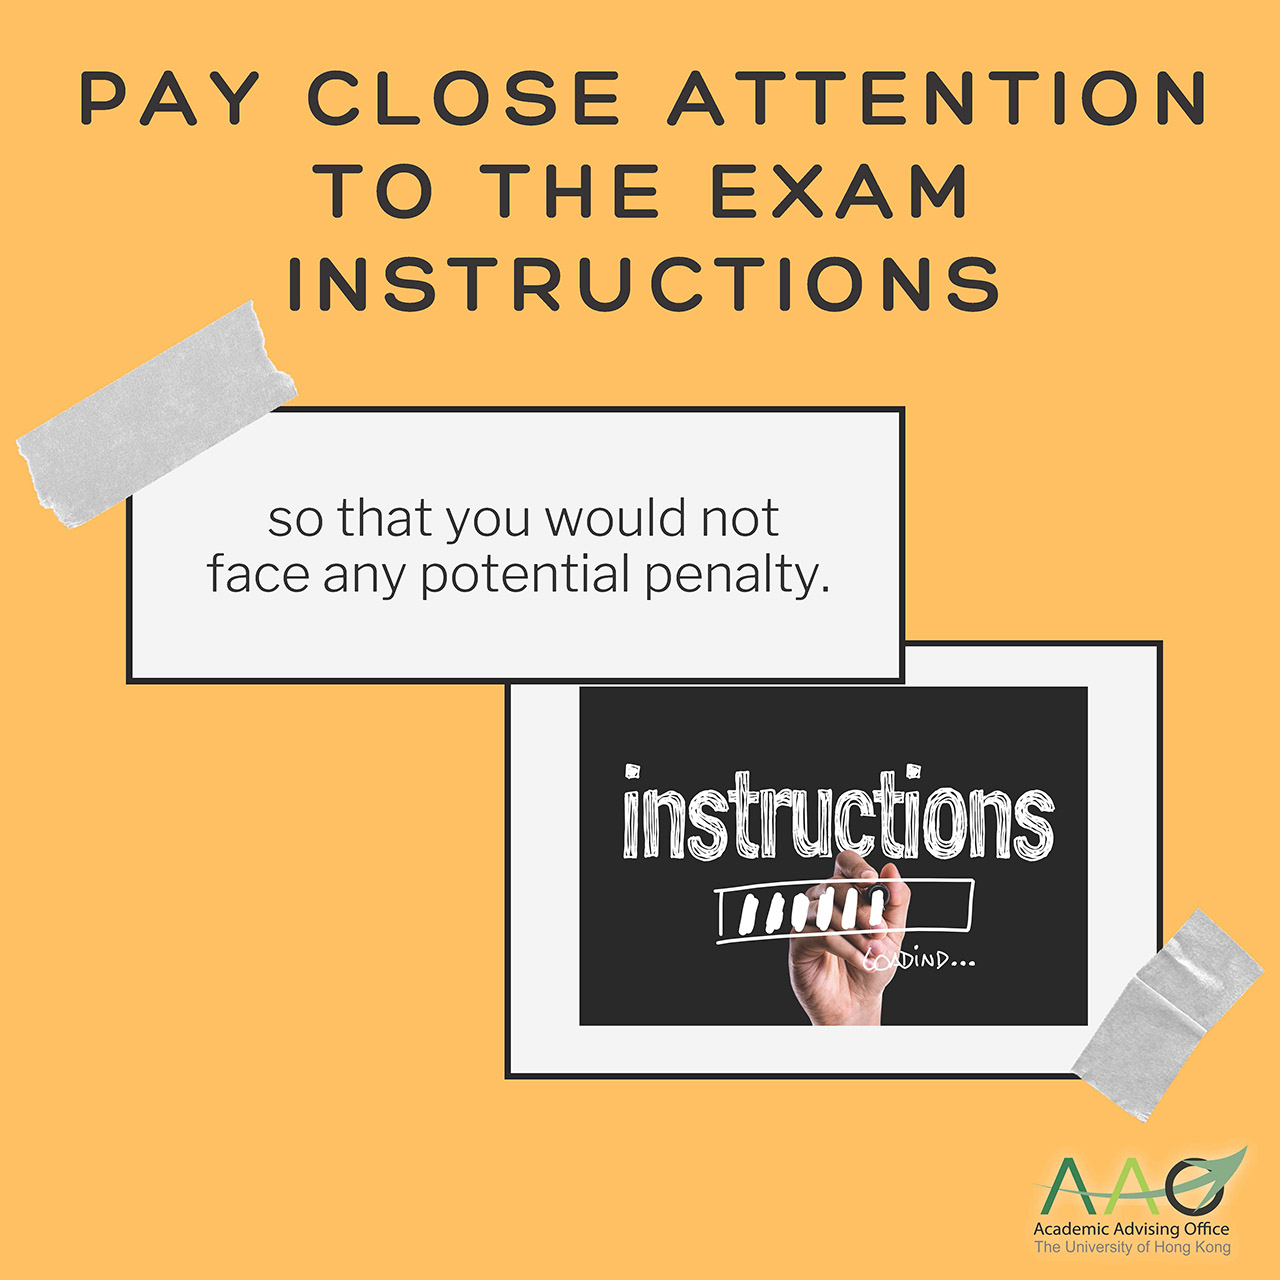 Pay close attention to the exam instructions so that you would not face any potential penalty.